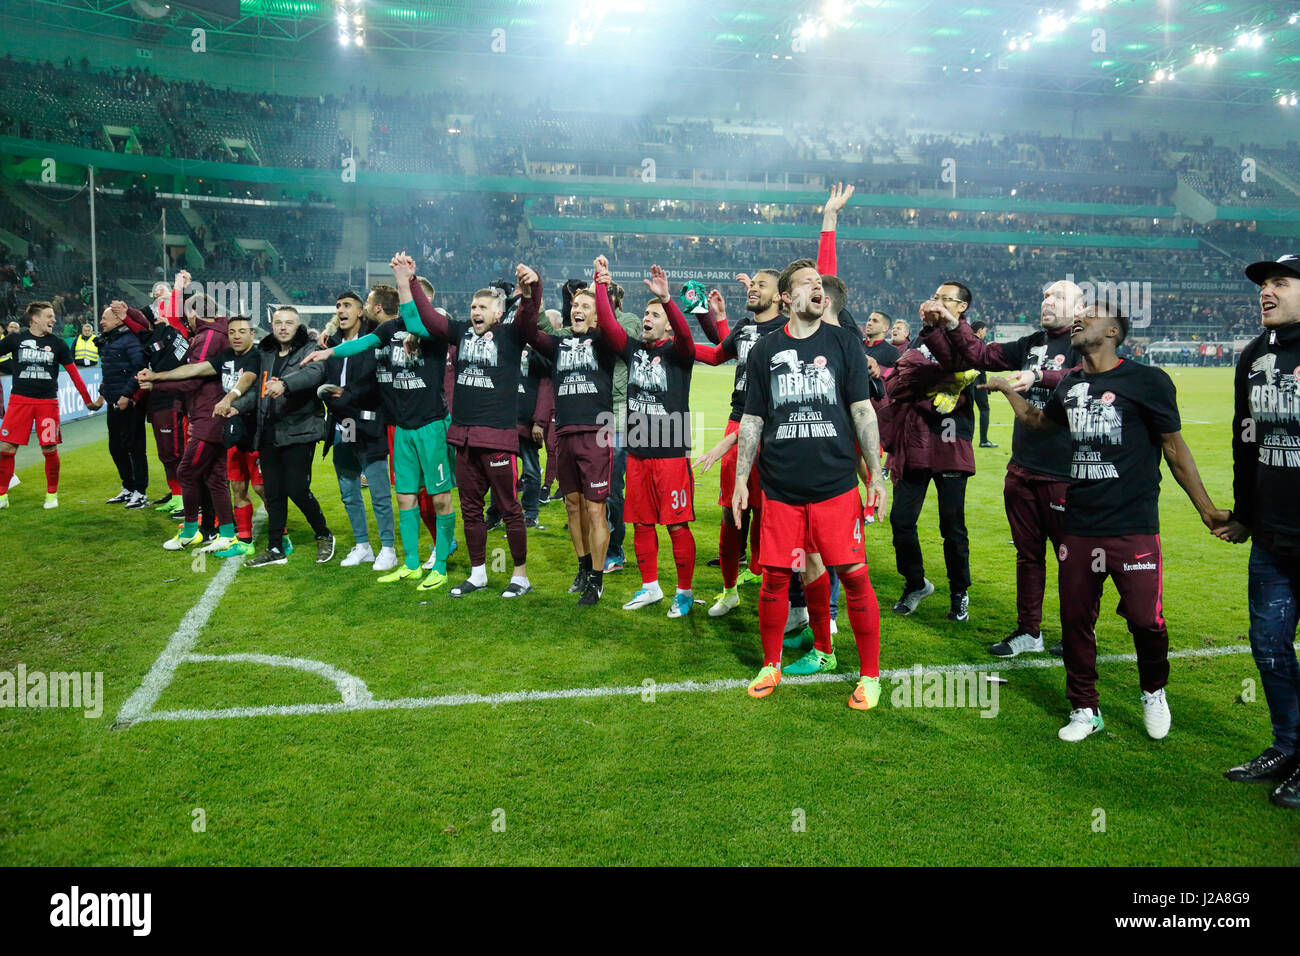 sports, football, DFB Cup, 2016/2017, Round 5, semifinal, Borussia Moenchengladbach vs Eintracht Frankfurt 7:8 on penalties, Stadium Borussia Park, Frankfurt players rejoicing at the win and the entry to the DFB Cup final 2017 in Berlin Stock Photo